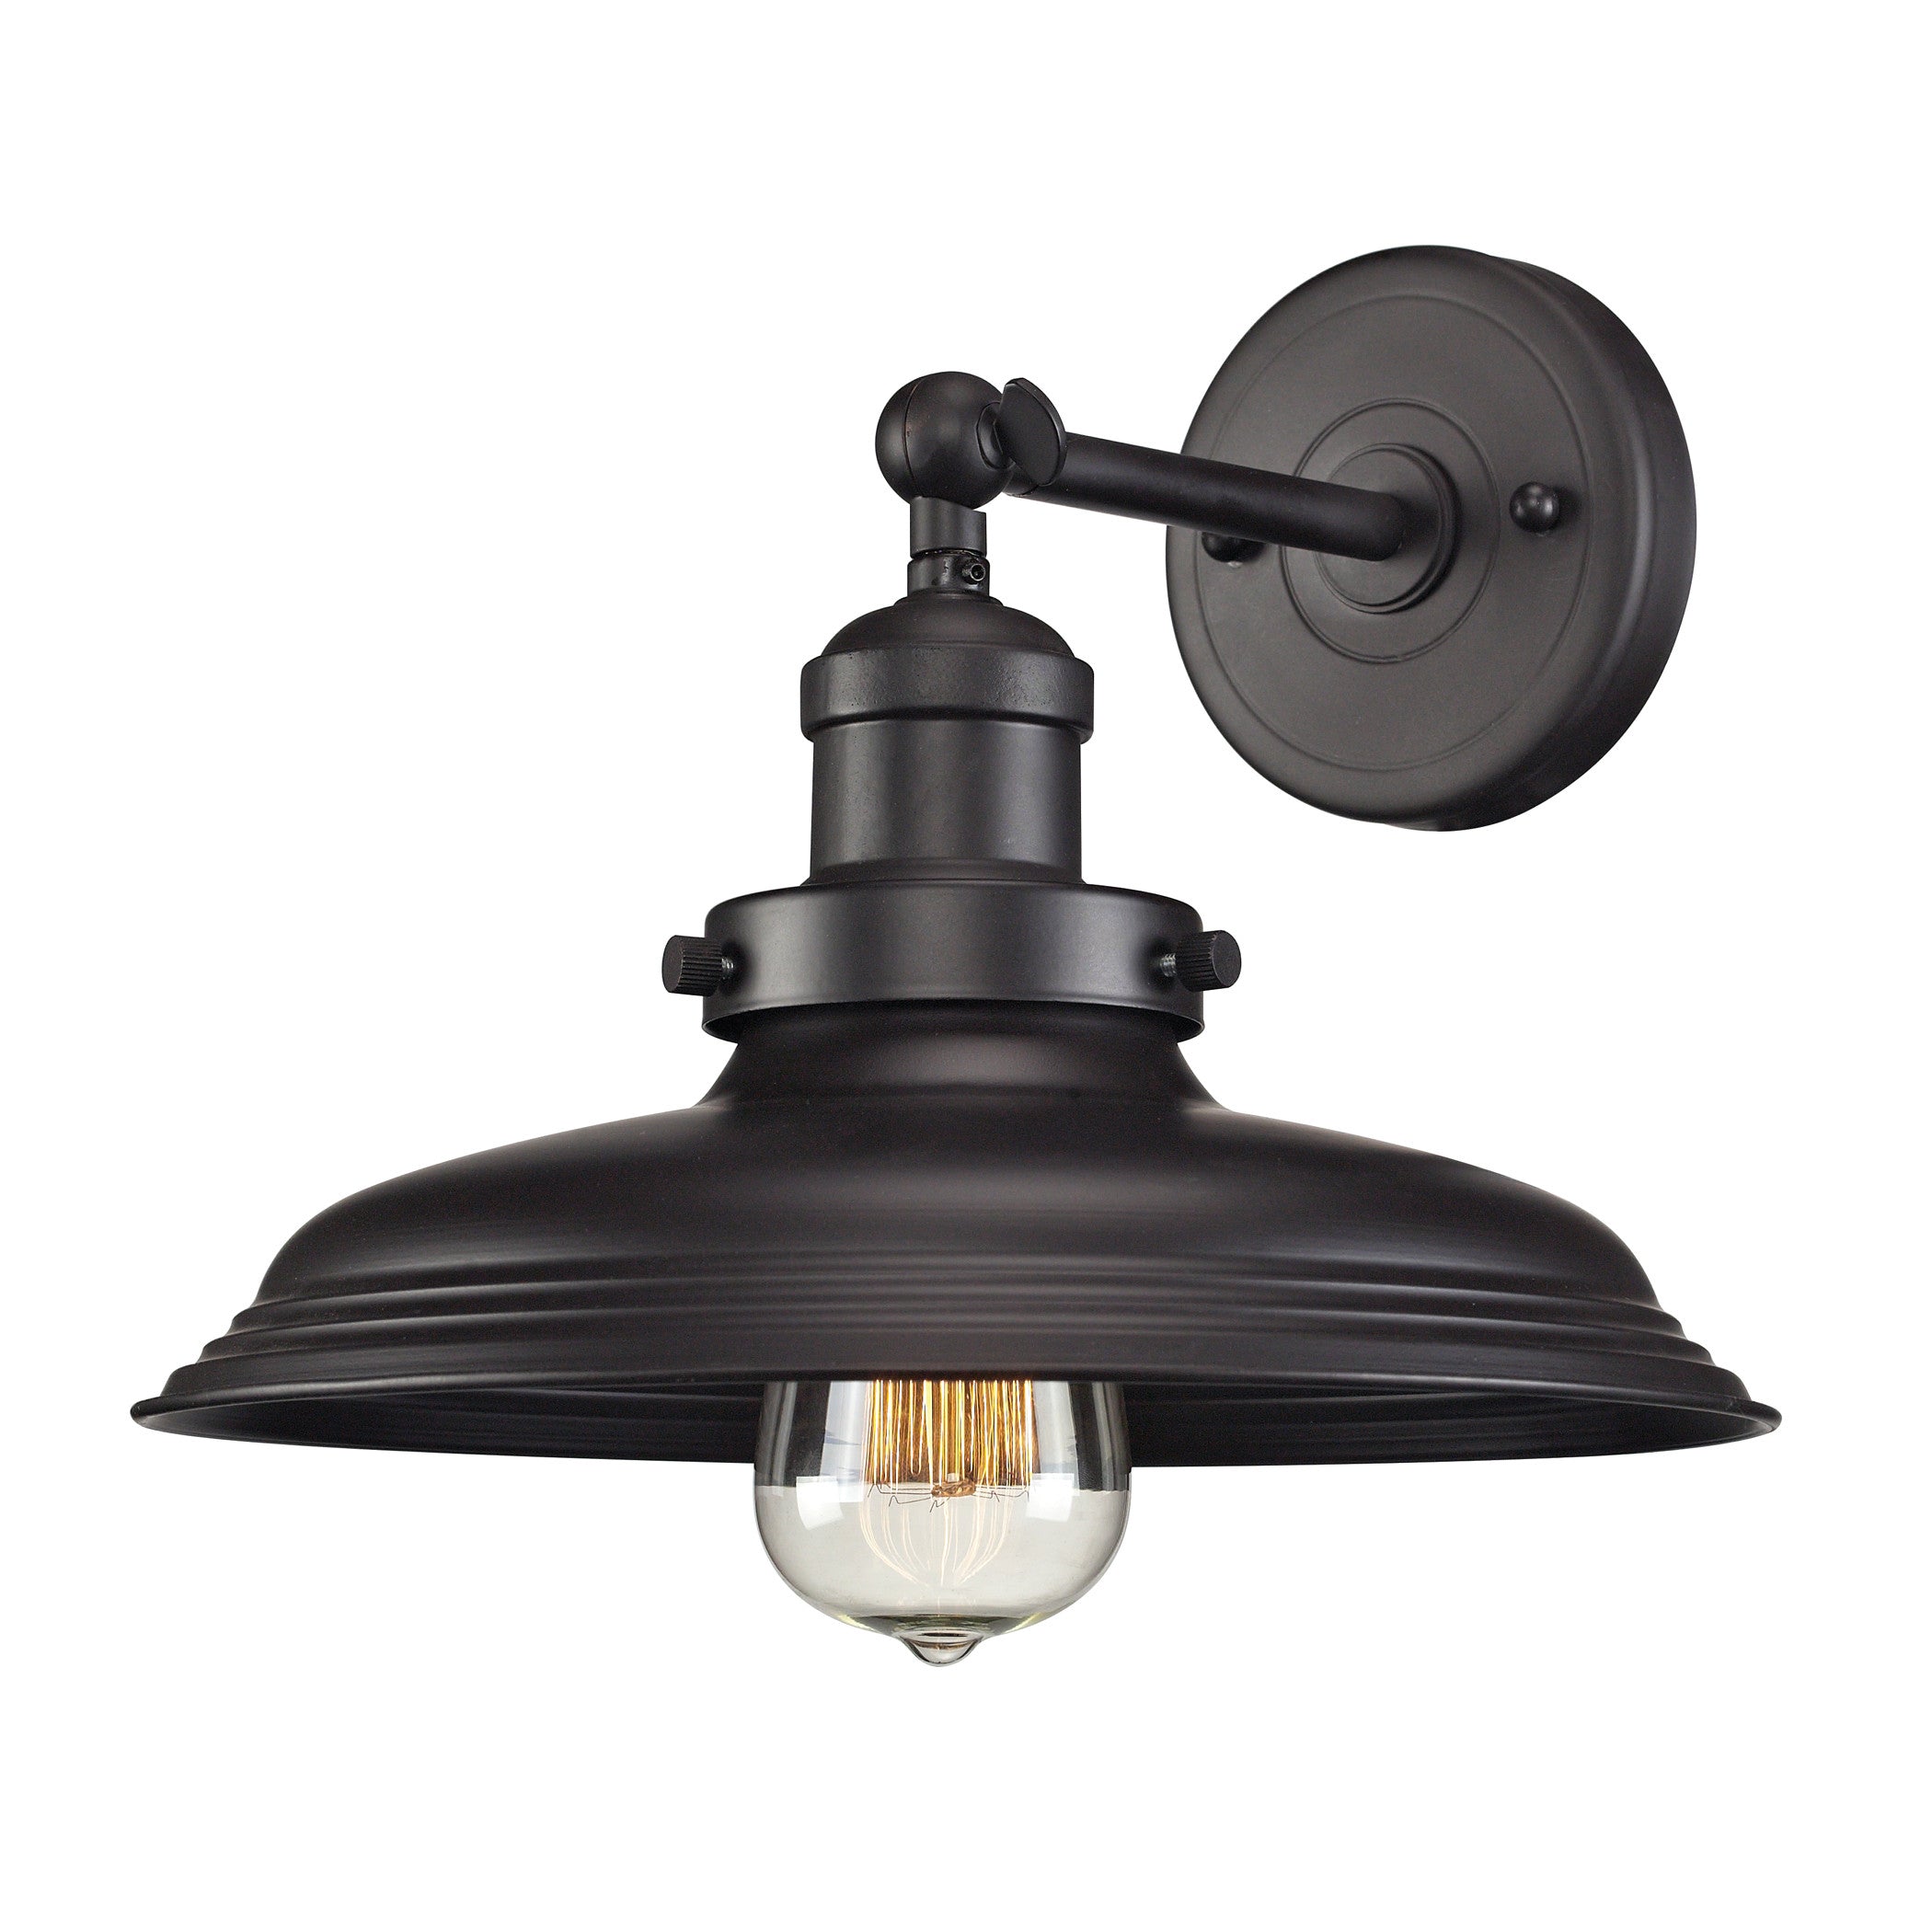 Newberry Wall Sconce in Oil Rubbed Bronze by ELK Lighting 55040-1